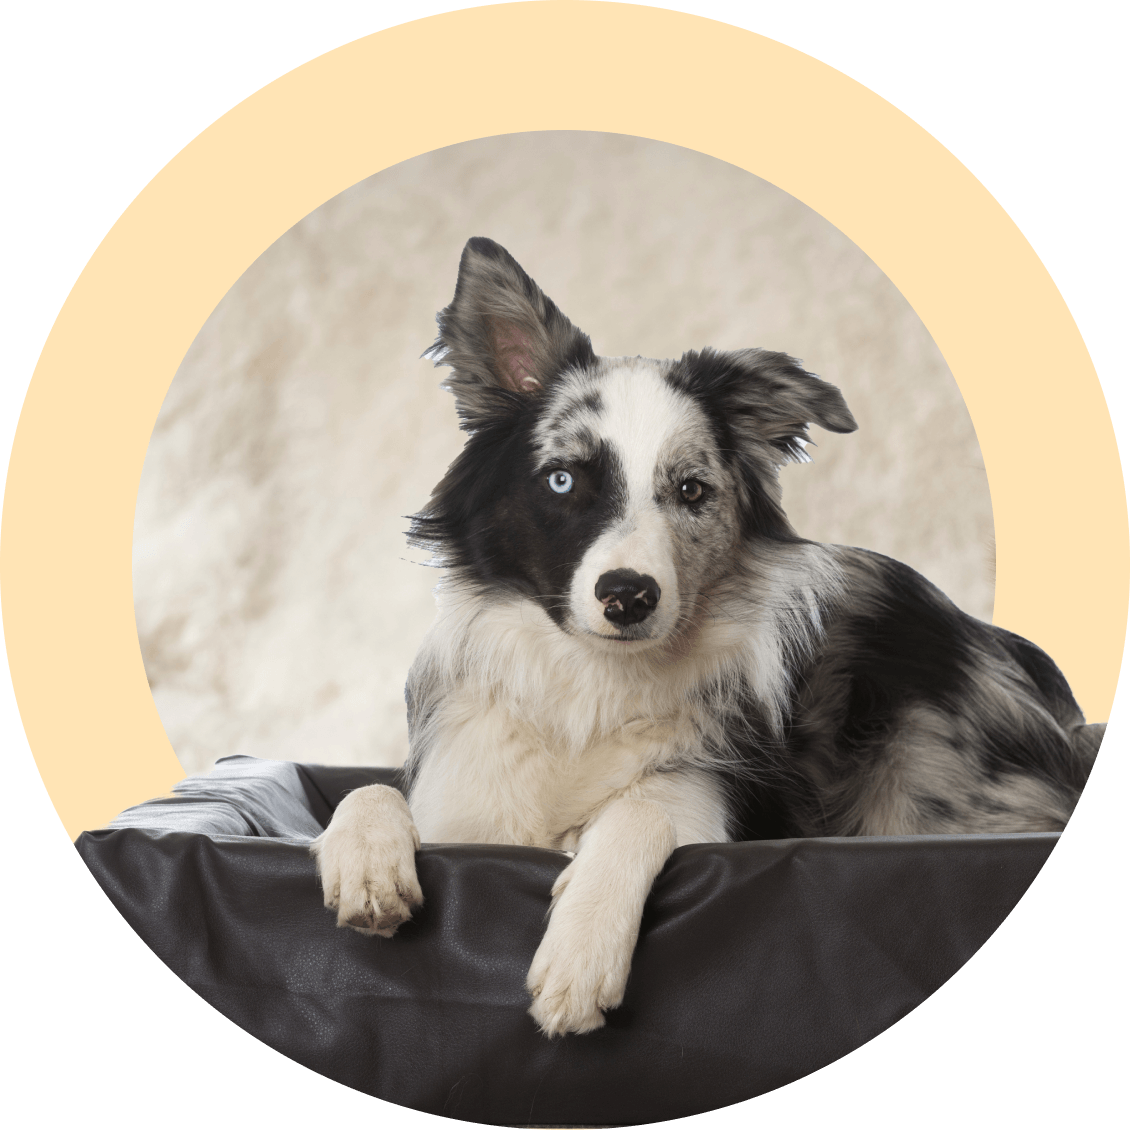 Skill: Bed Stay - Included with Online Life Skills 1 Program - McCann Professional Dog Trainers